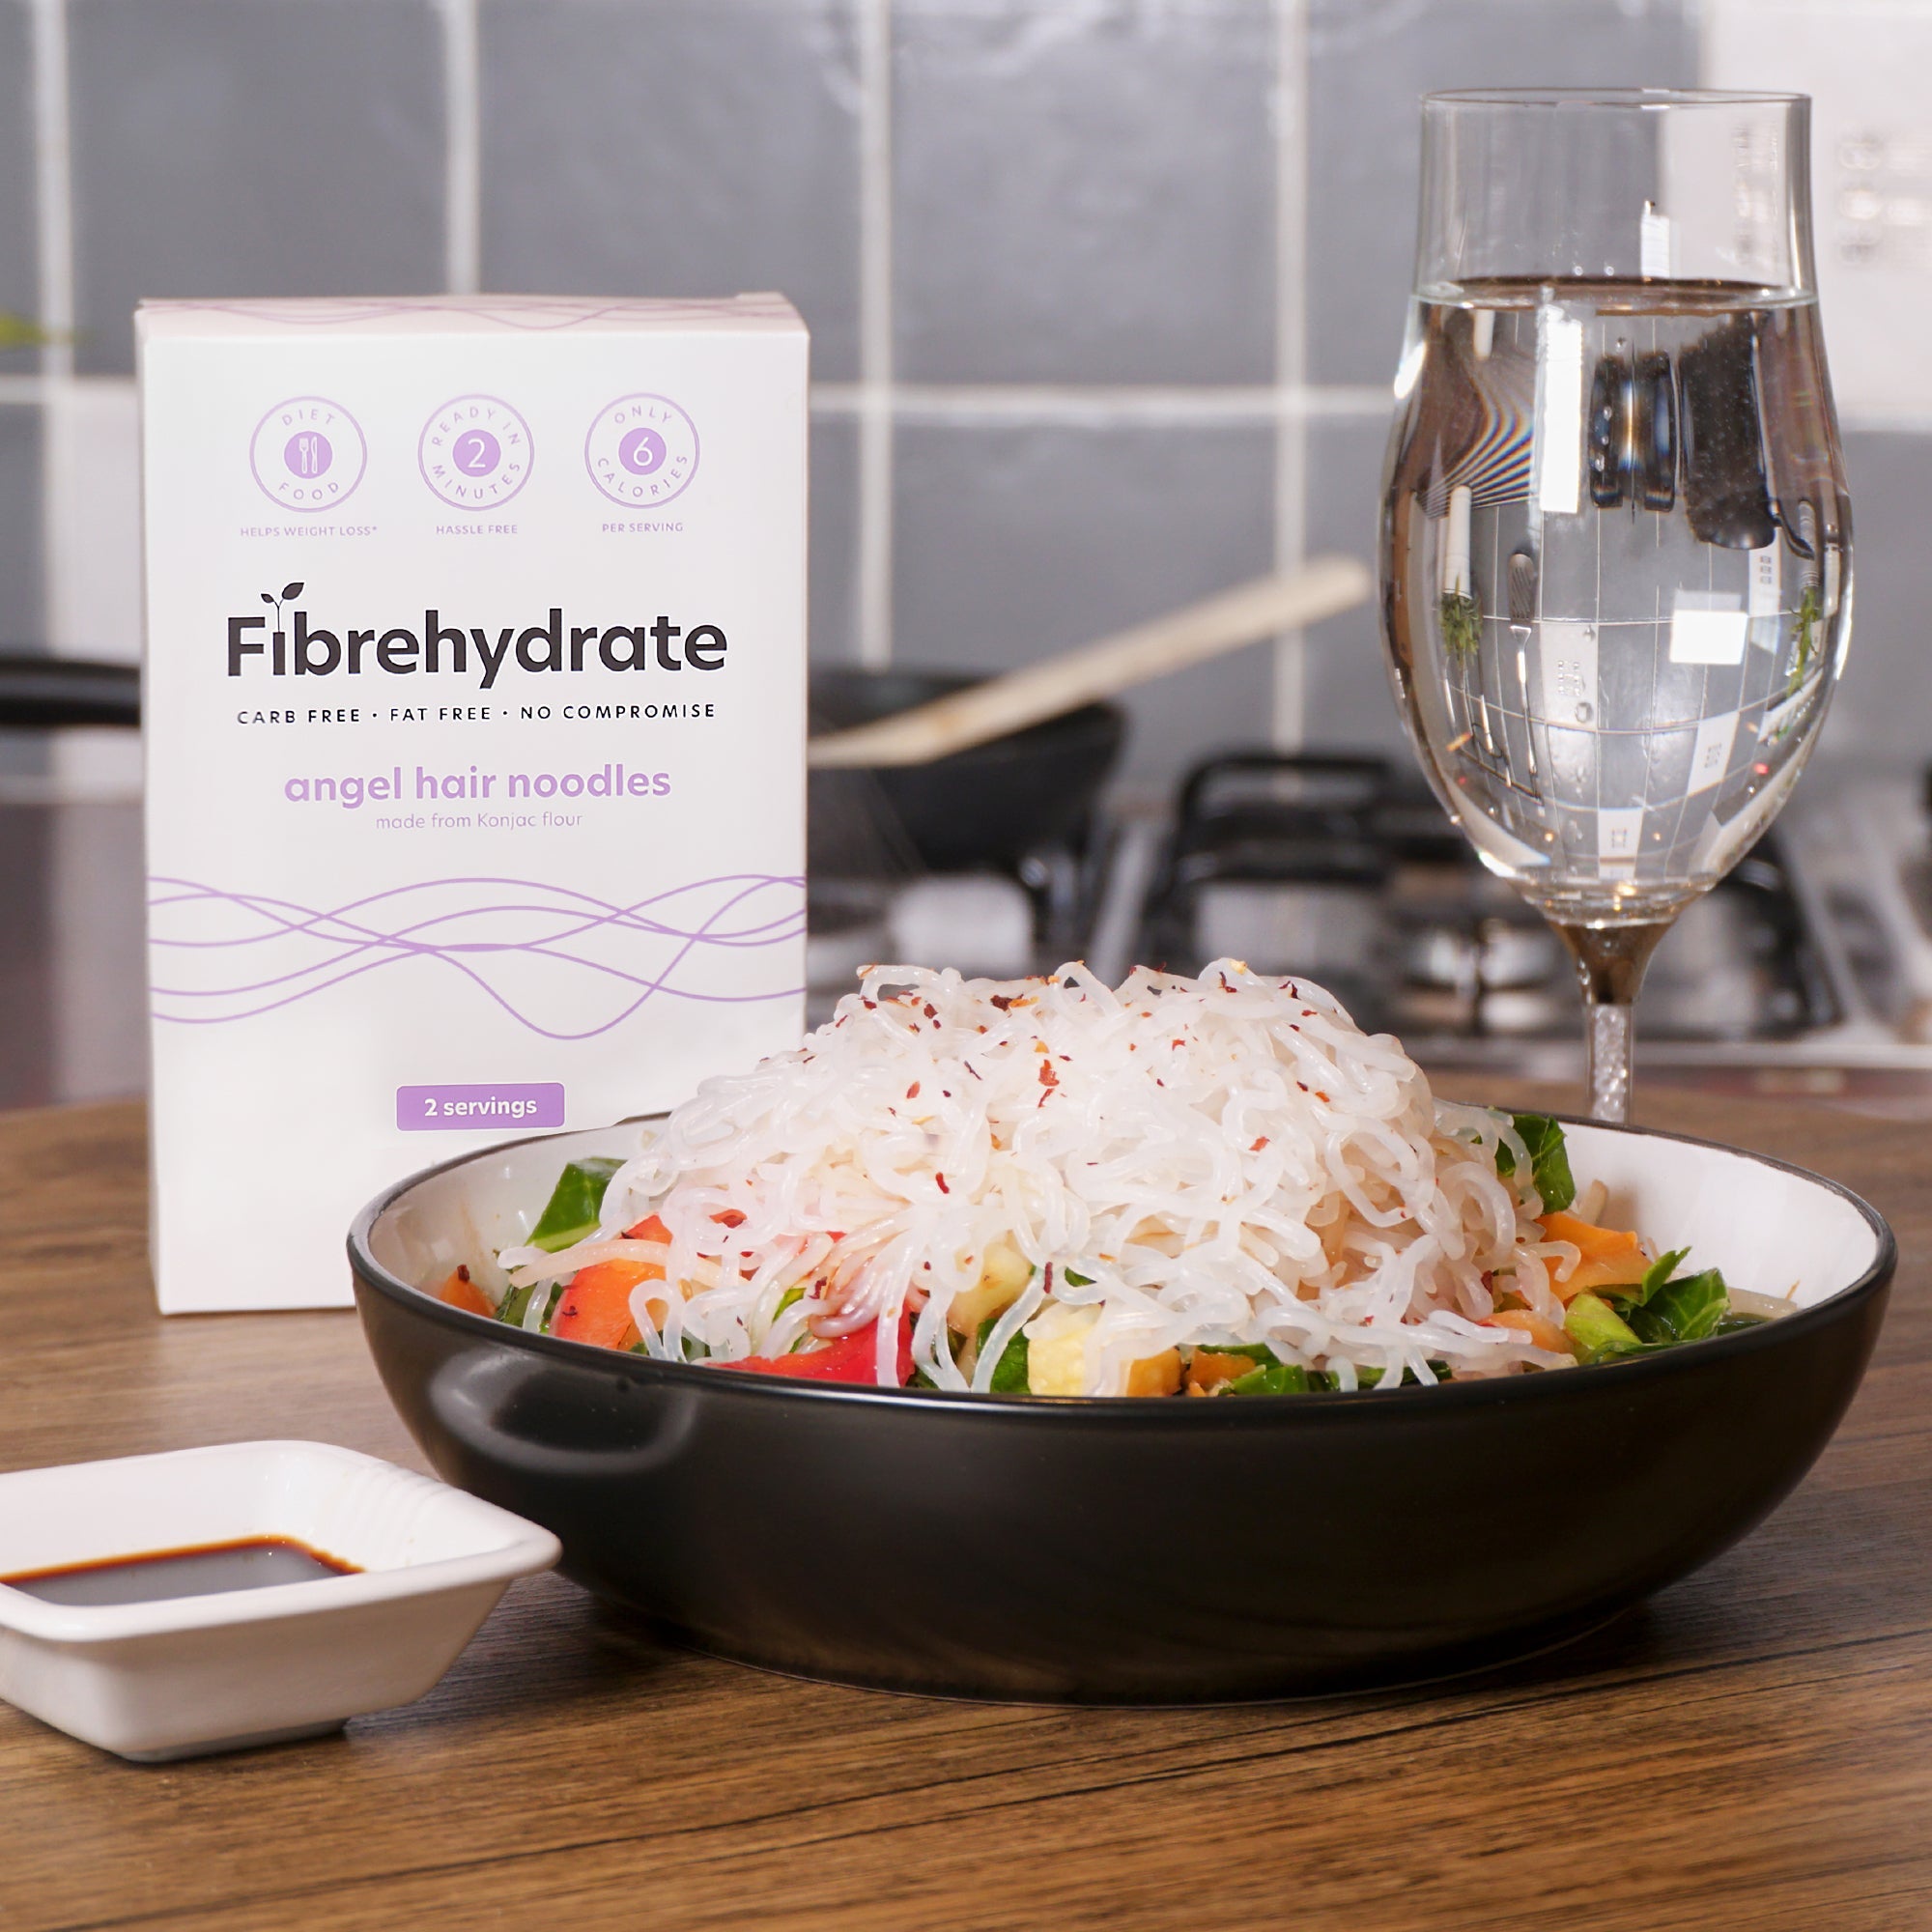 Fibrehydrate Angel Hair Noodles (1 pack)